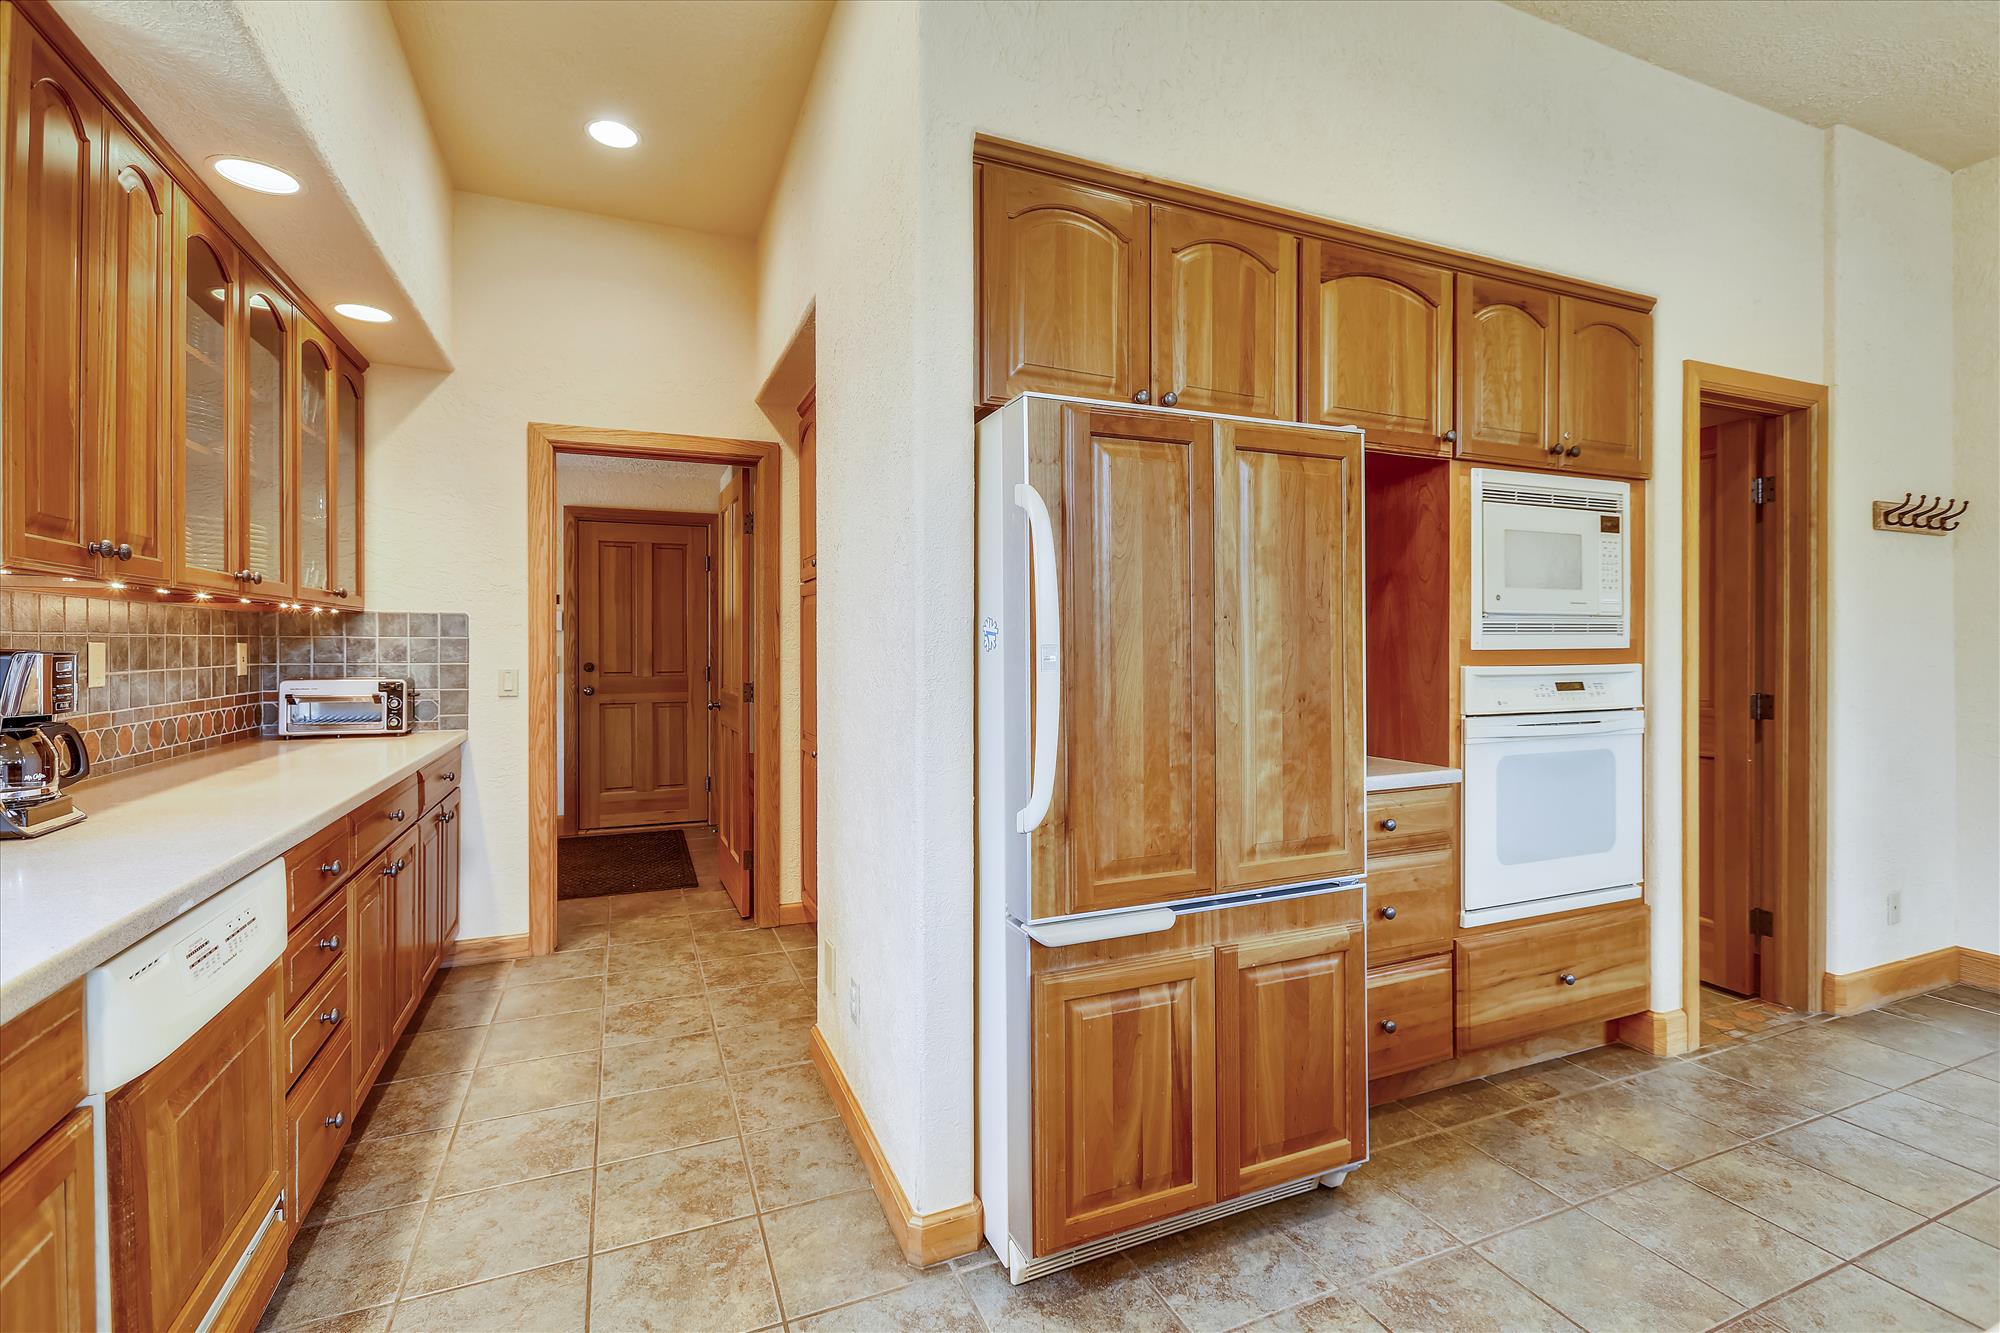 This spacious kitchen offers all of the storage space and walking room to host a large party - Evergreen Lodge Breckenridge Vacation Rental